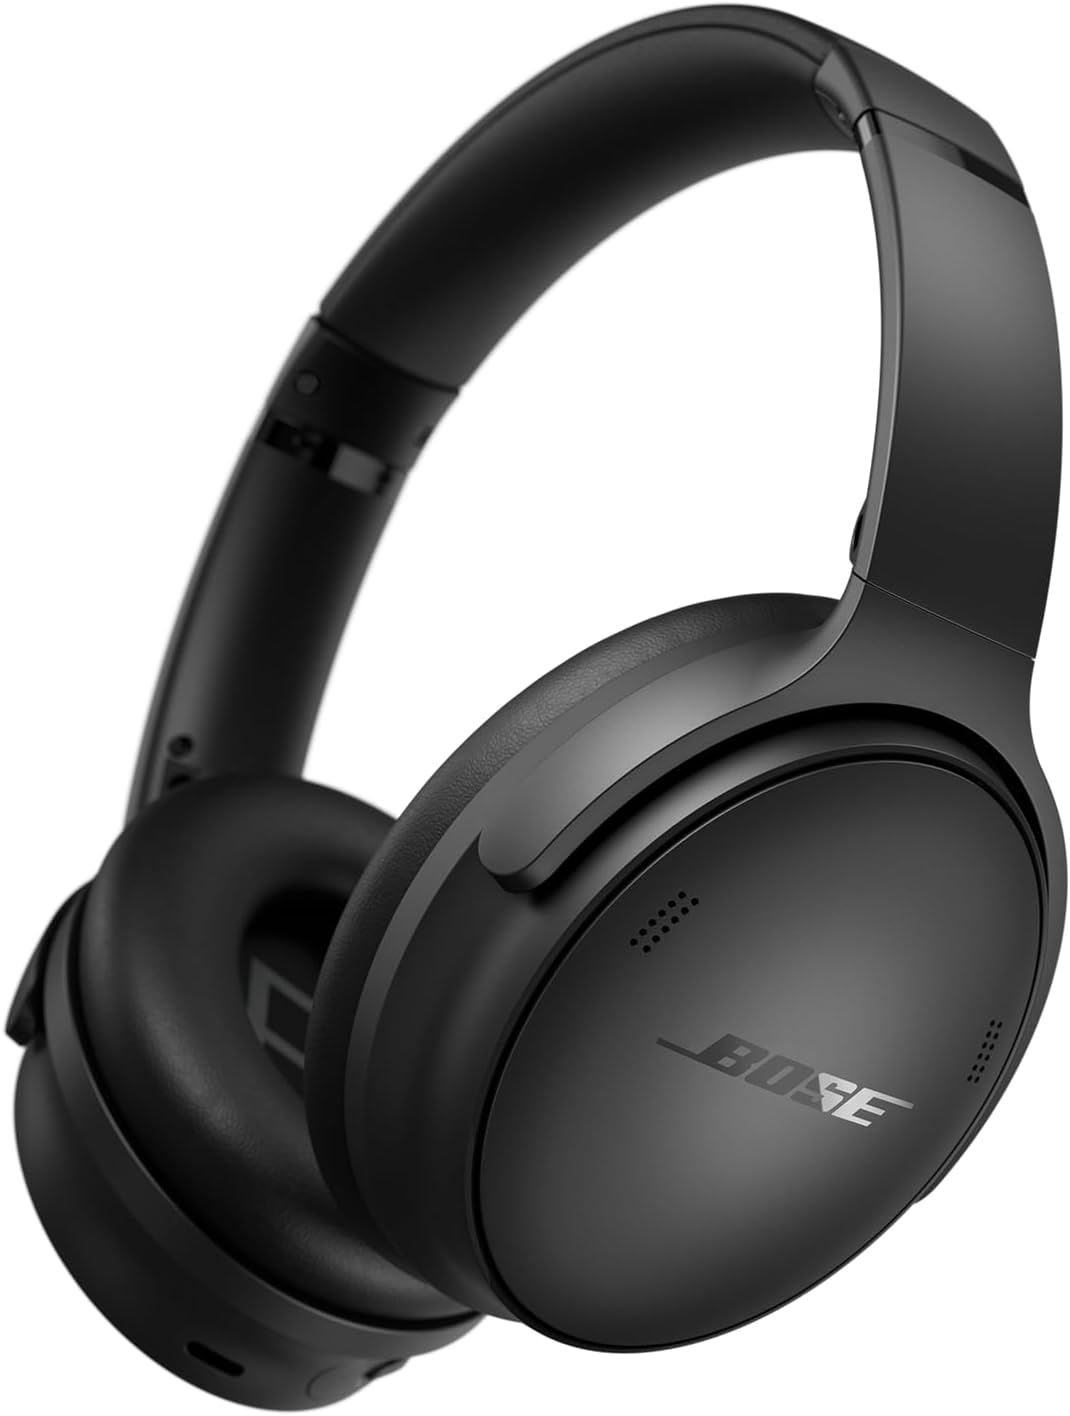 Amazon.com: Bose QuietComfort Wireless Noise Cancelling Headphones, Bluetooth Over Ear Headphones with Up To 24 Hours of Battery Life, Black : Electronics $249.00